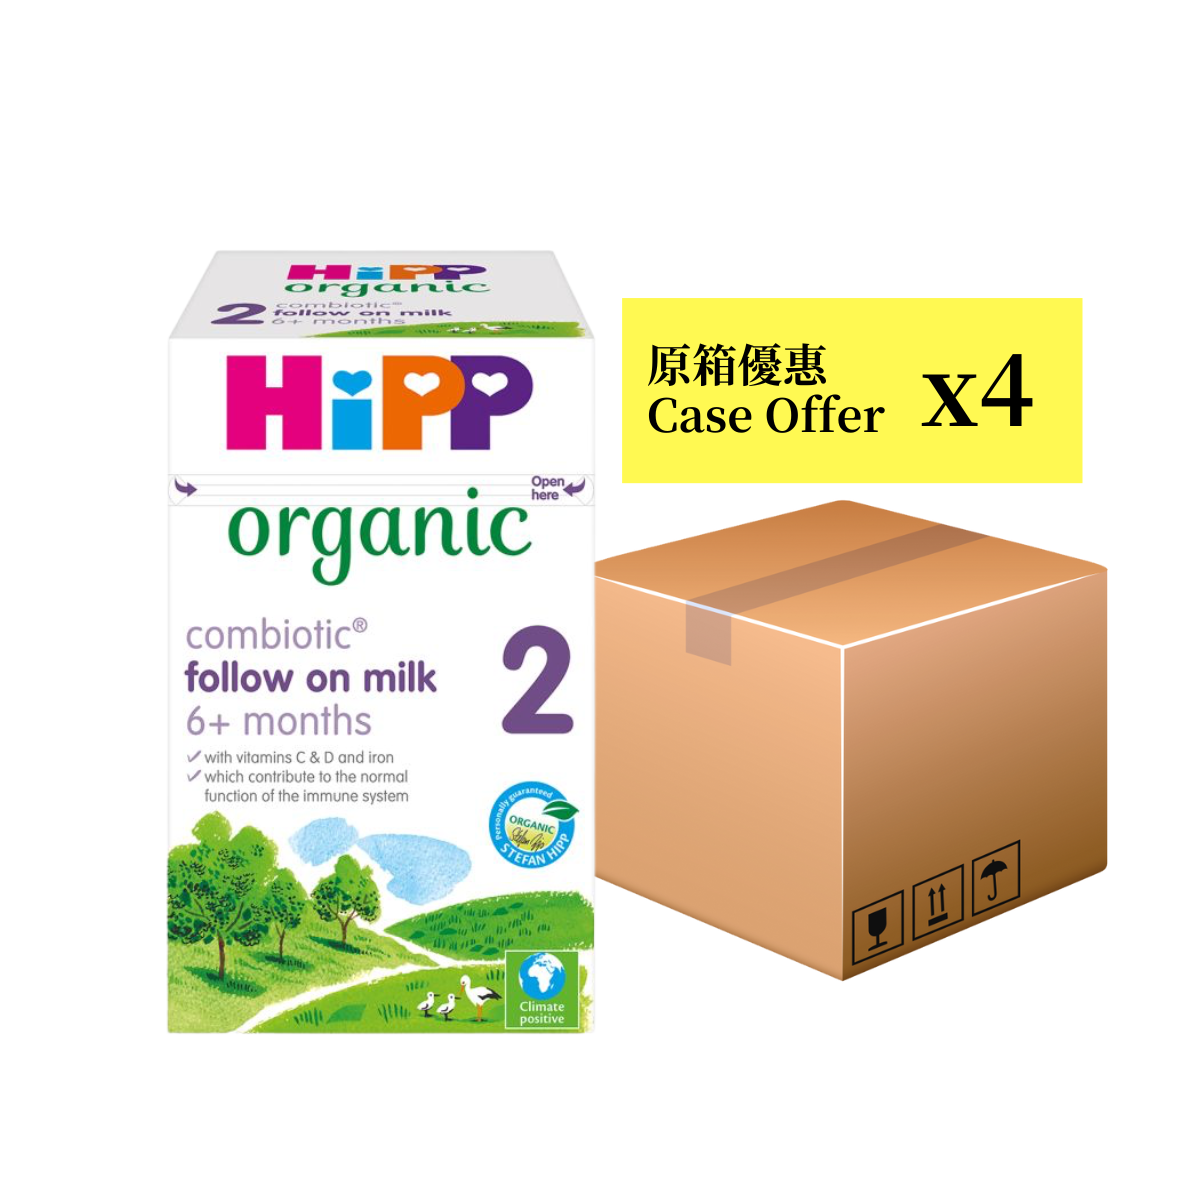 Case Offer UK version Organic Follow on Milk 2 (6-12 months) x 4 boxes Parallel Import